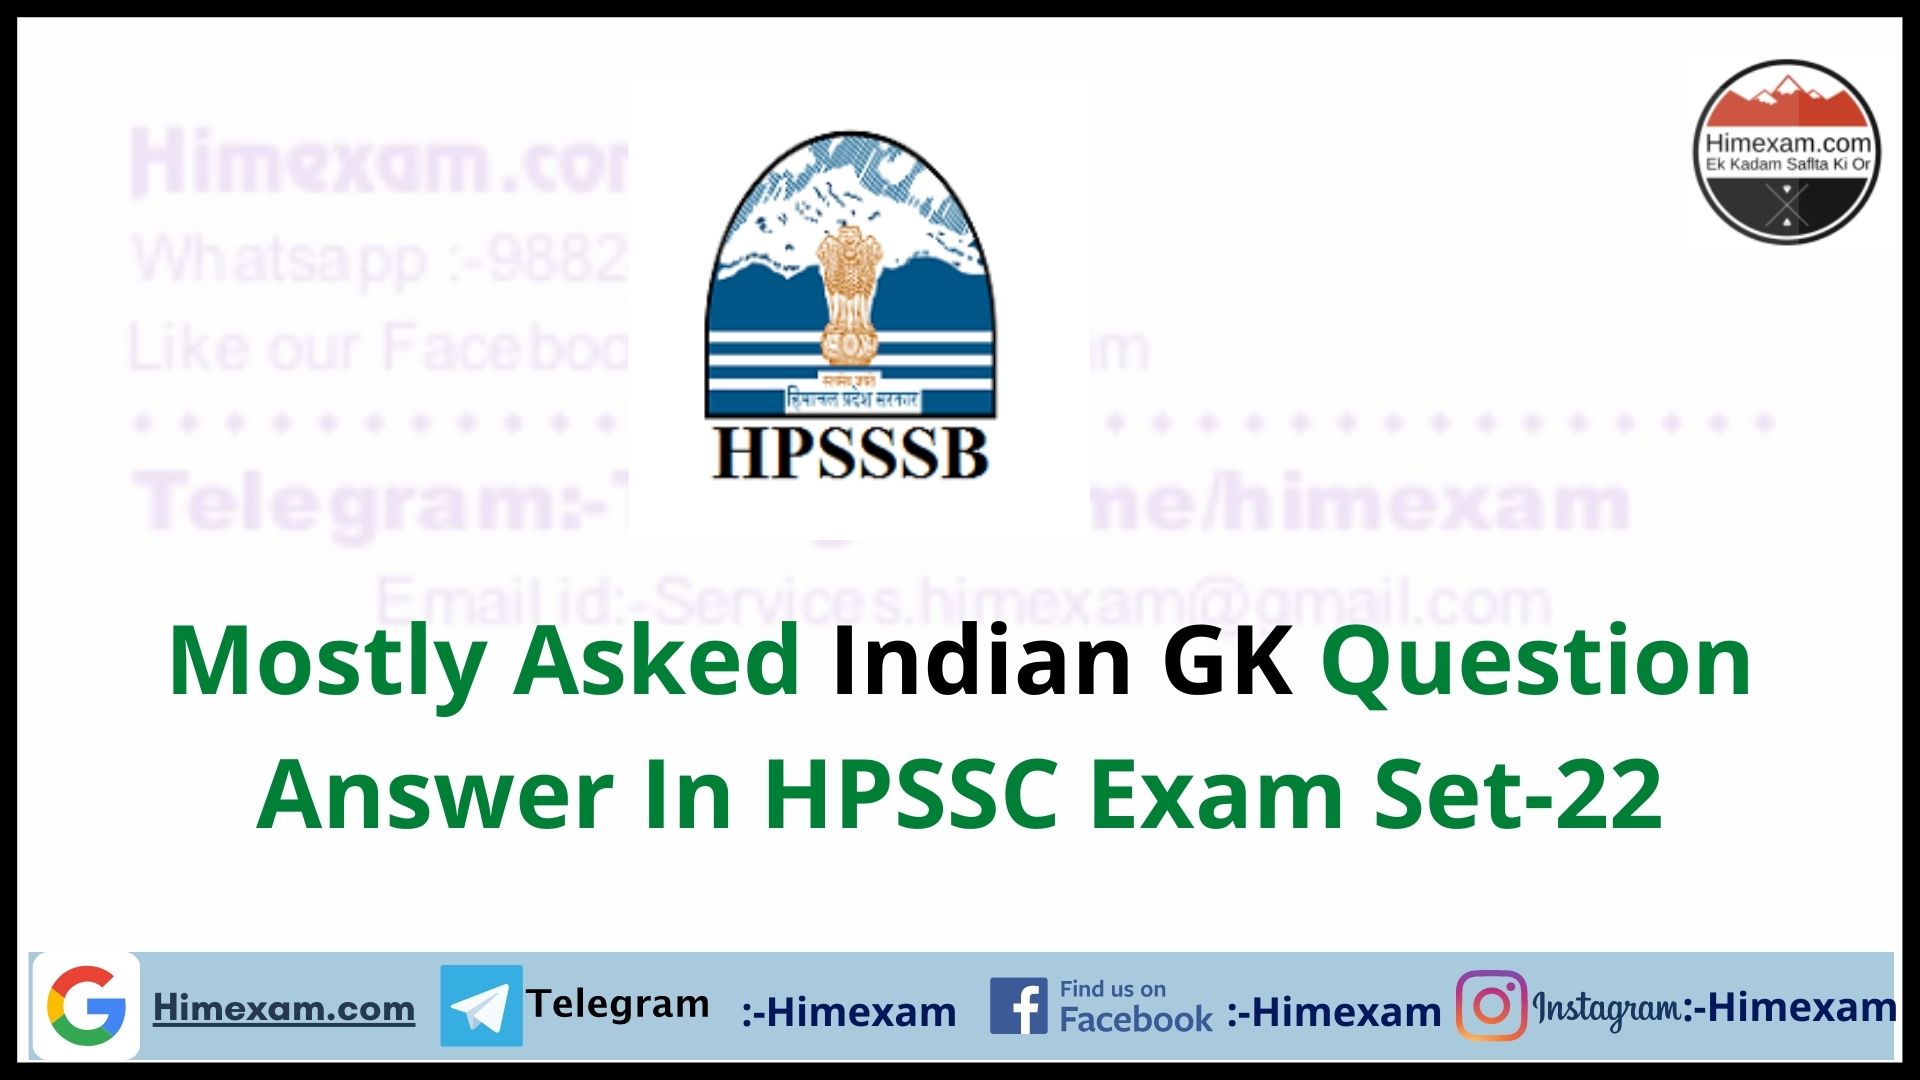 Mostly Asked Indian GK Question Answer In HPSSC Exam Set-22